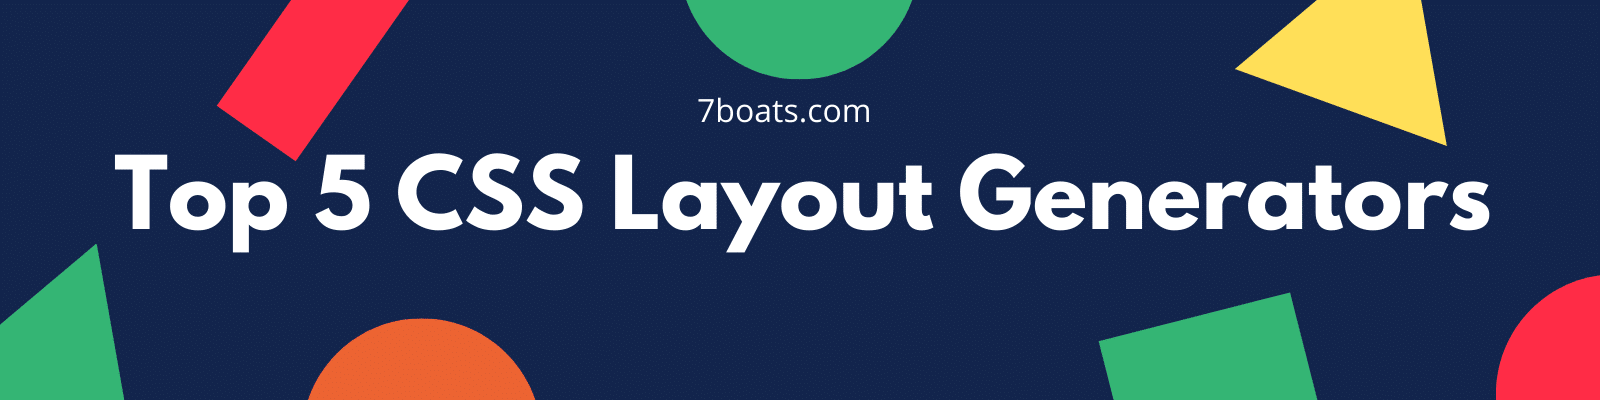 Top 5 CSS Layout Generator Tools To Help with Small Basic Code